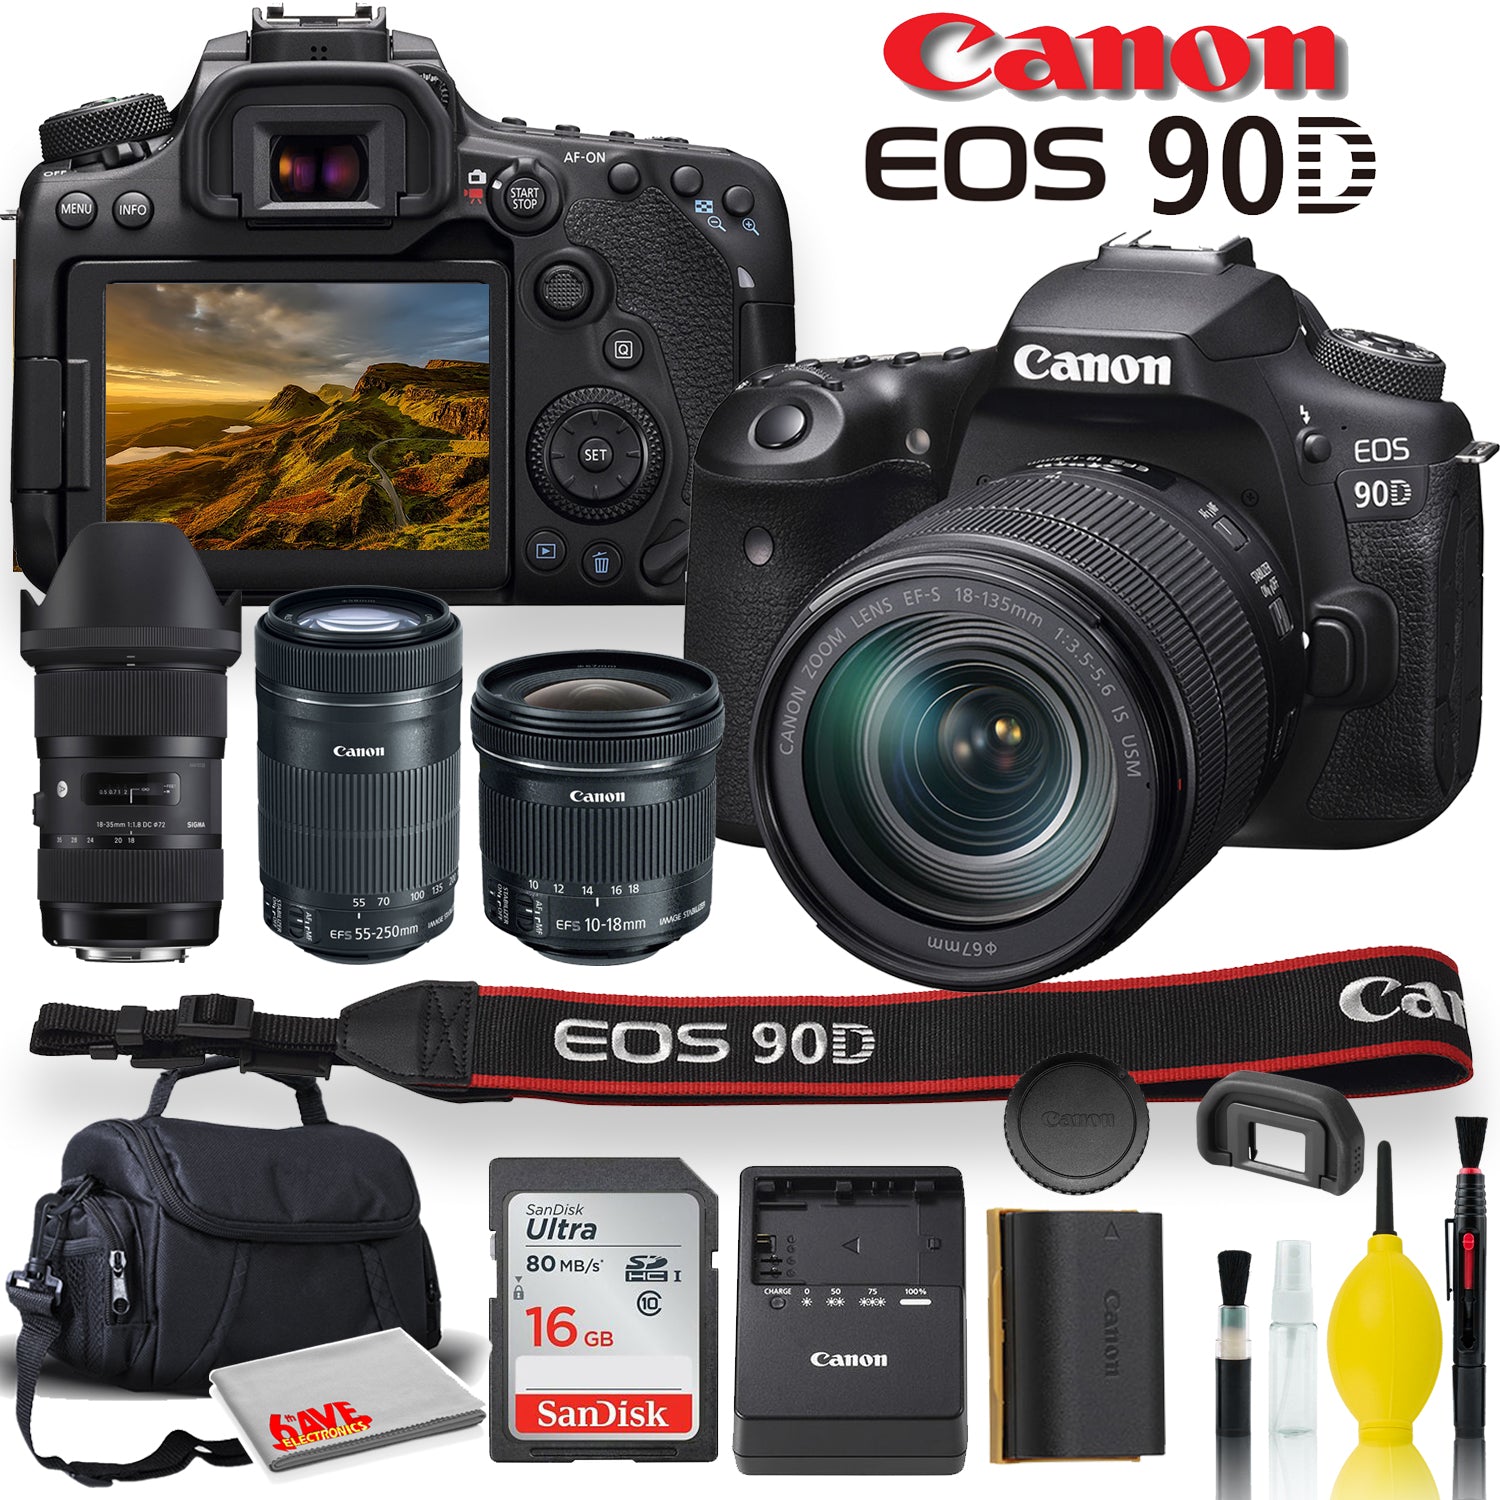 Canon EOS 90D DSLR Camera With 18-135mm Lens, Sigma 18-35mm, Canon EF-S 55-250mm, Canon EF-S 10-18mm, Soft Padded Case, Memory Card, and More - Triple Lens Set